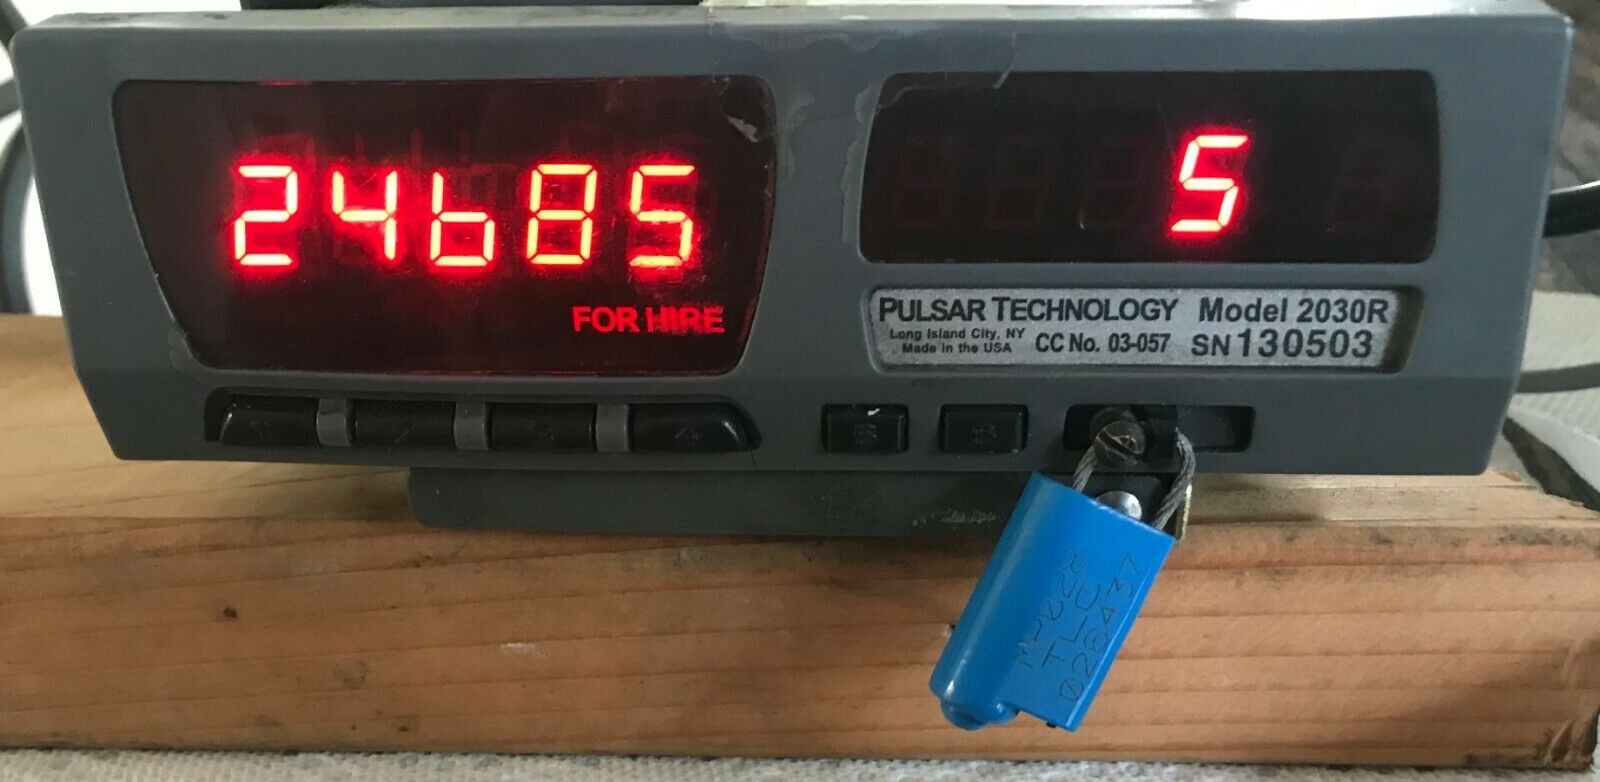 Pulsar Technology Model 2030r Smart Taxi Meter - Free Shipping